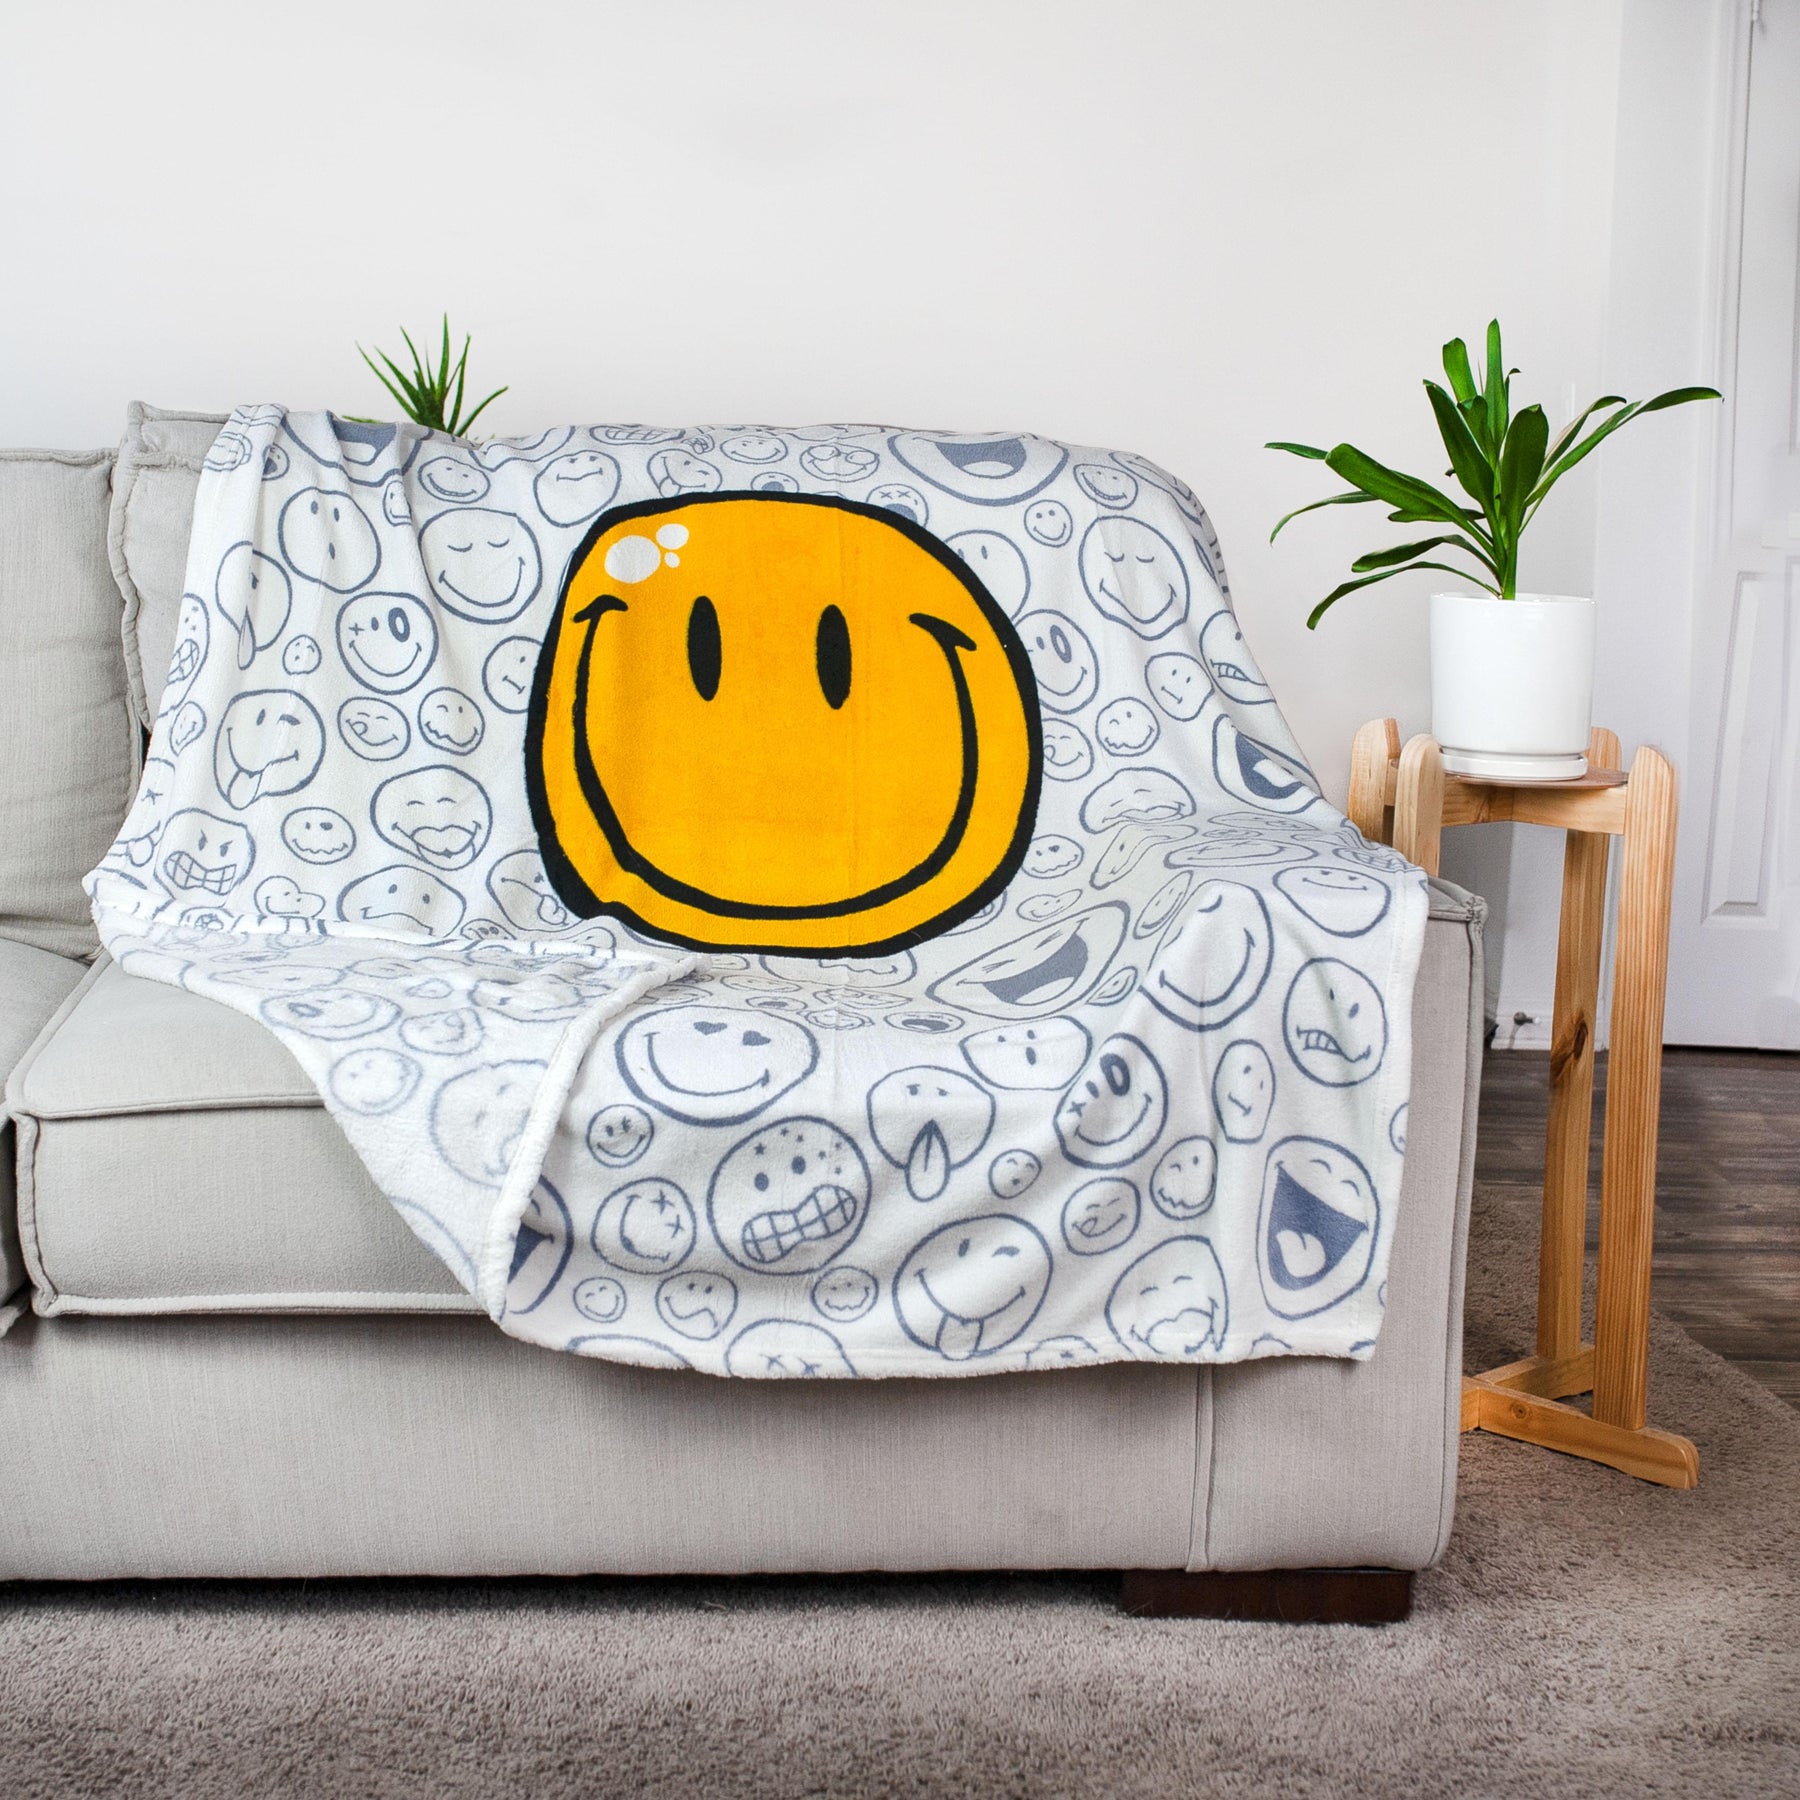 OFFICIAL Smiley World Soft Throw Blanket | Cute Plush Blanket | 50 x 60 Inches